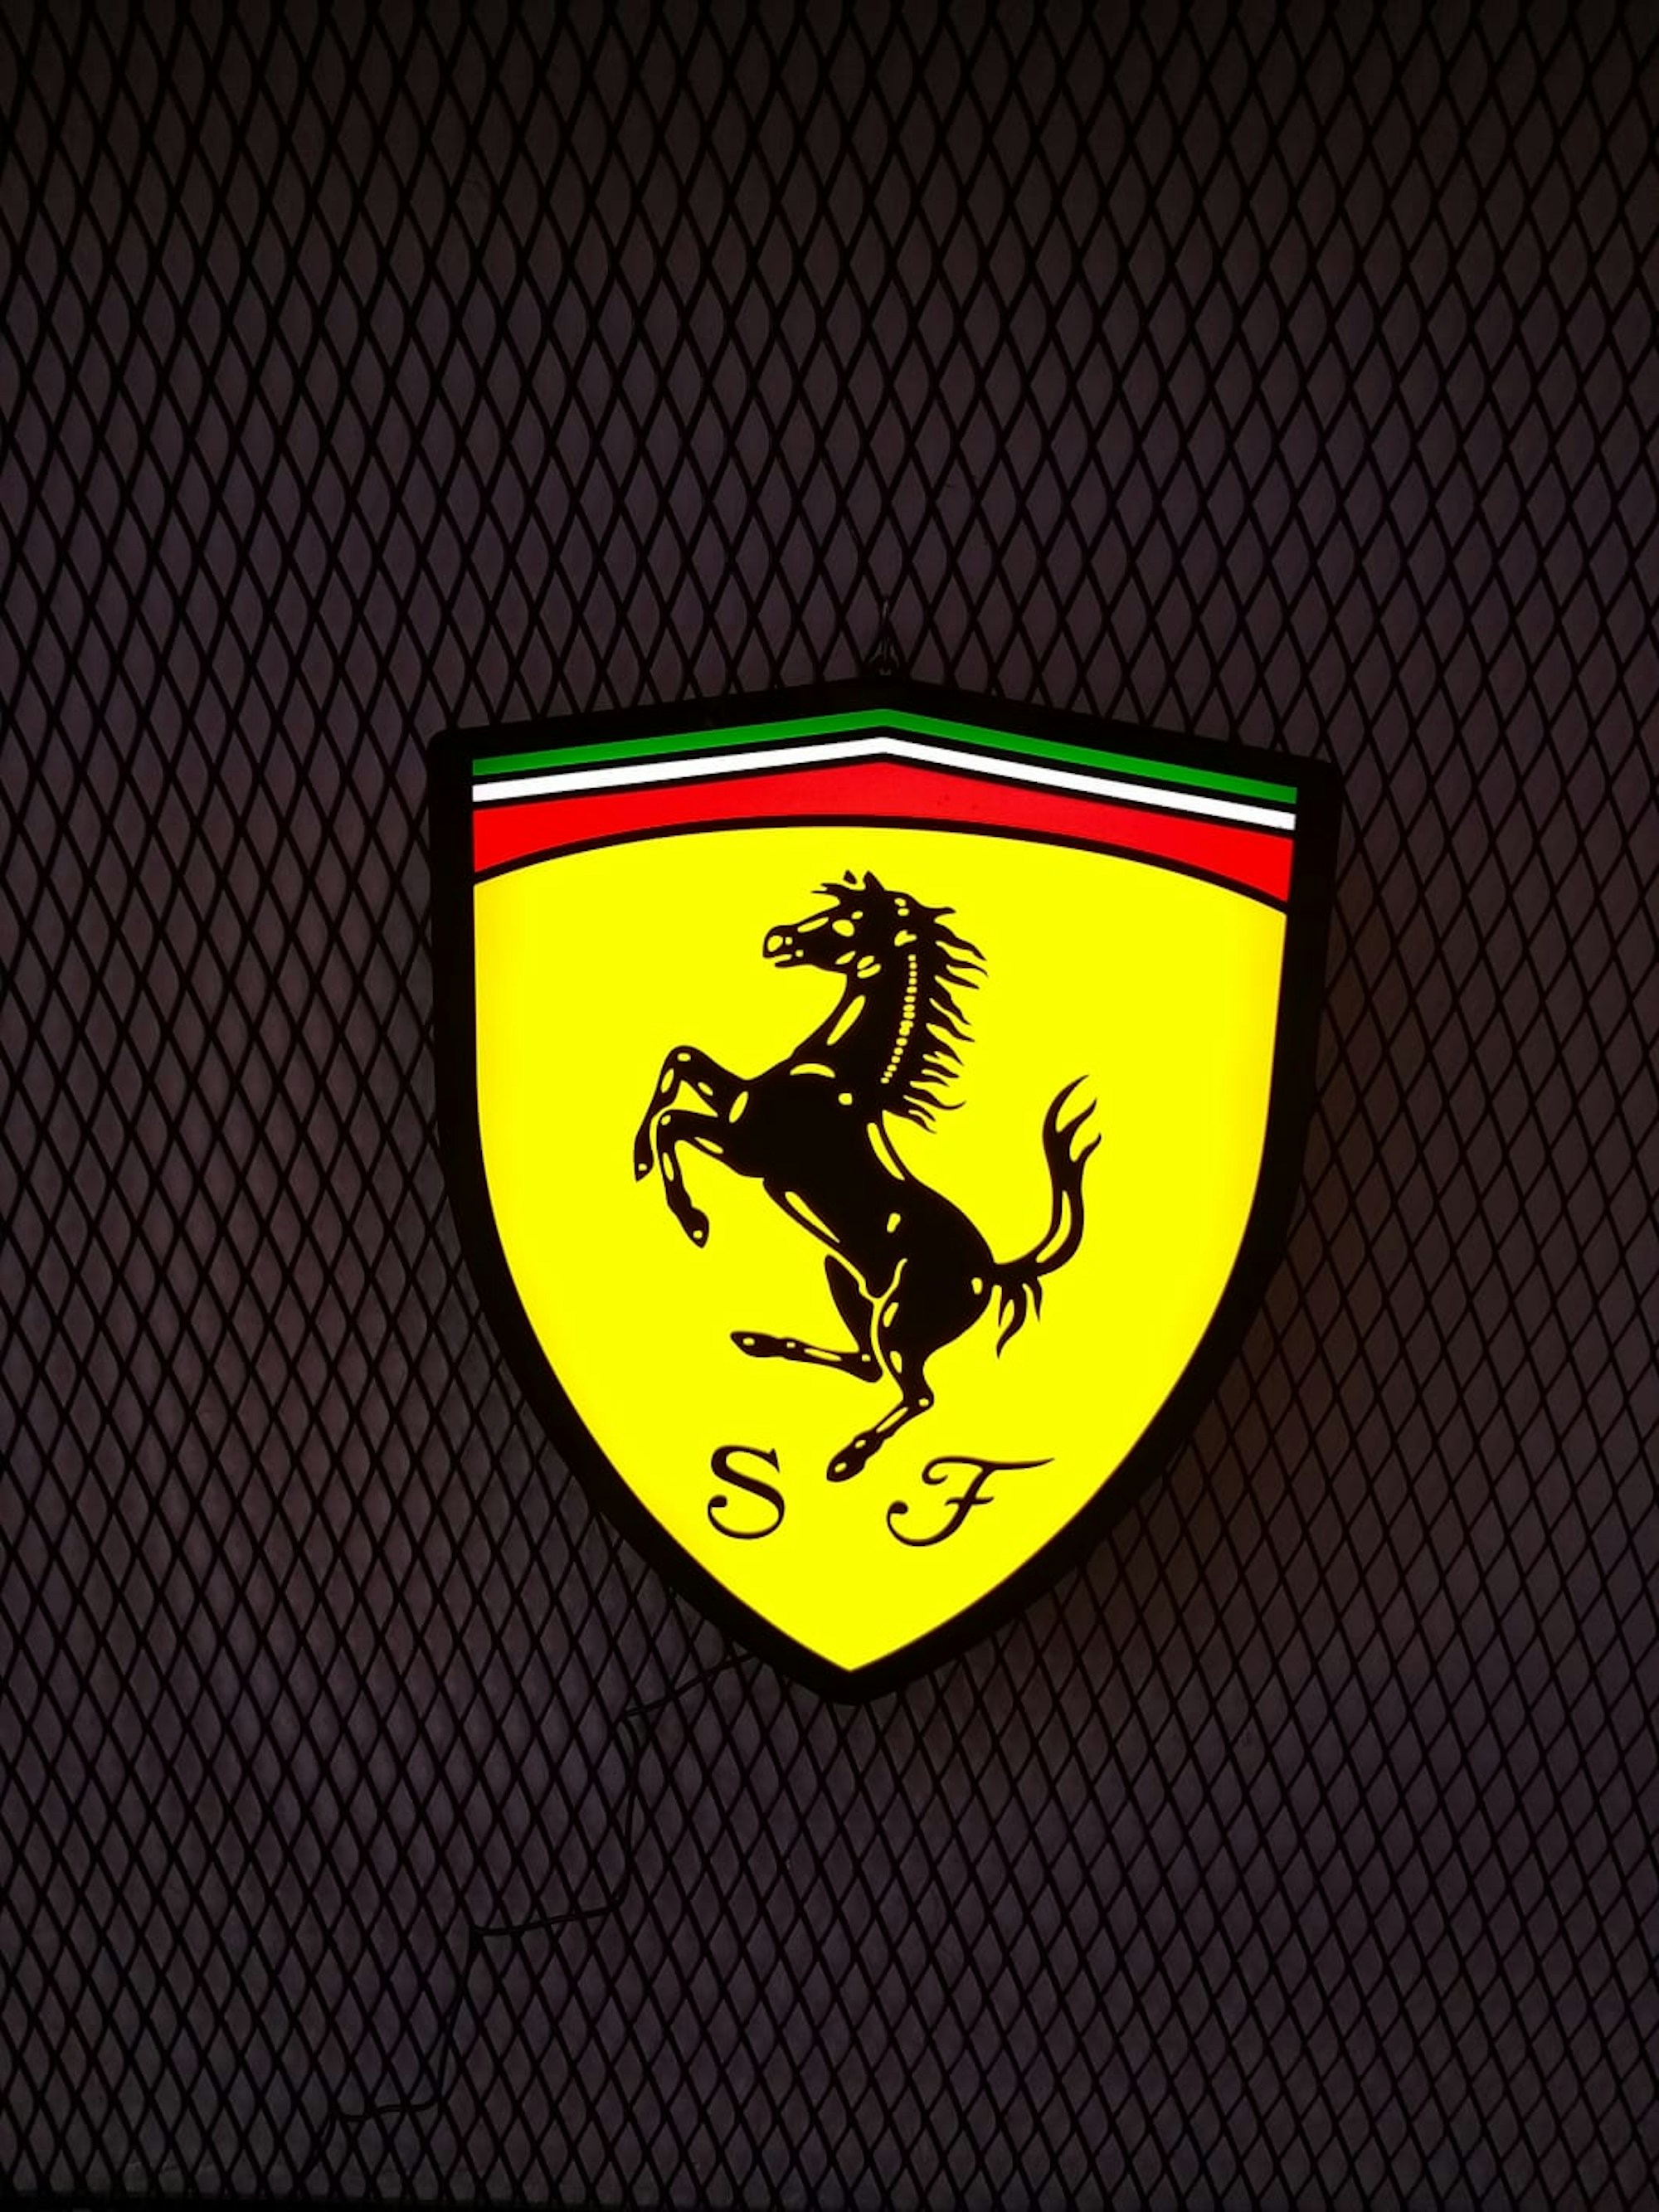 FERRARI ILLUMINATED SIGN for sale by auction in Firenze, Italy